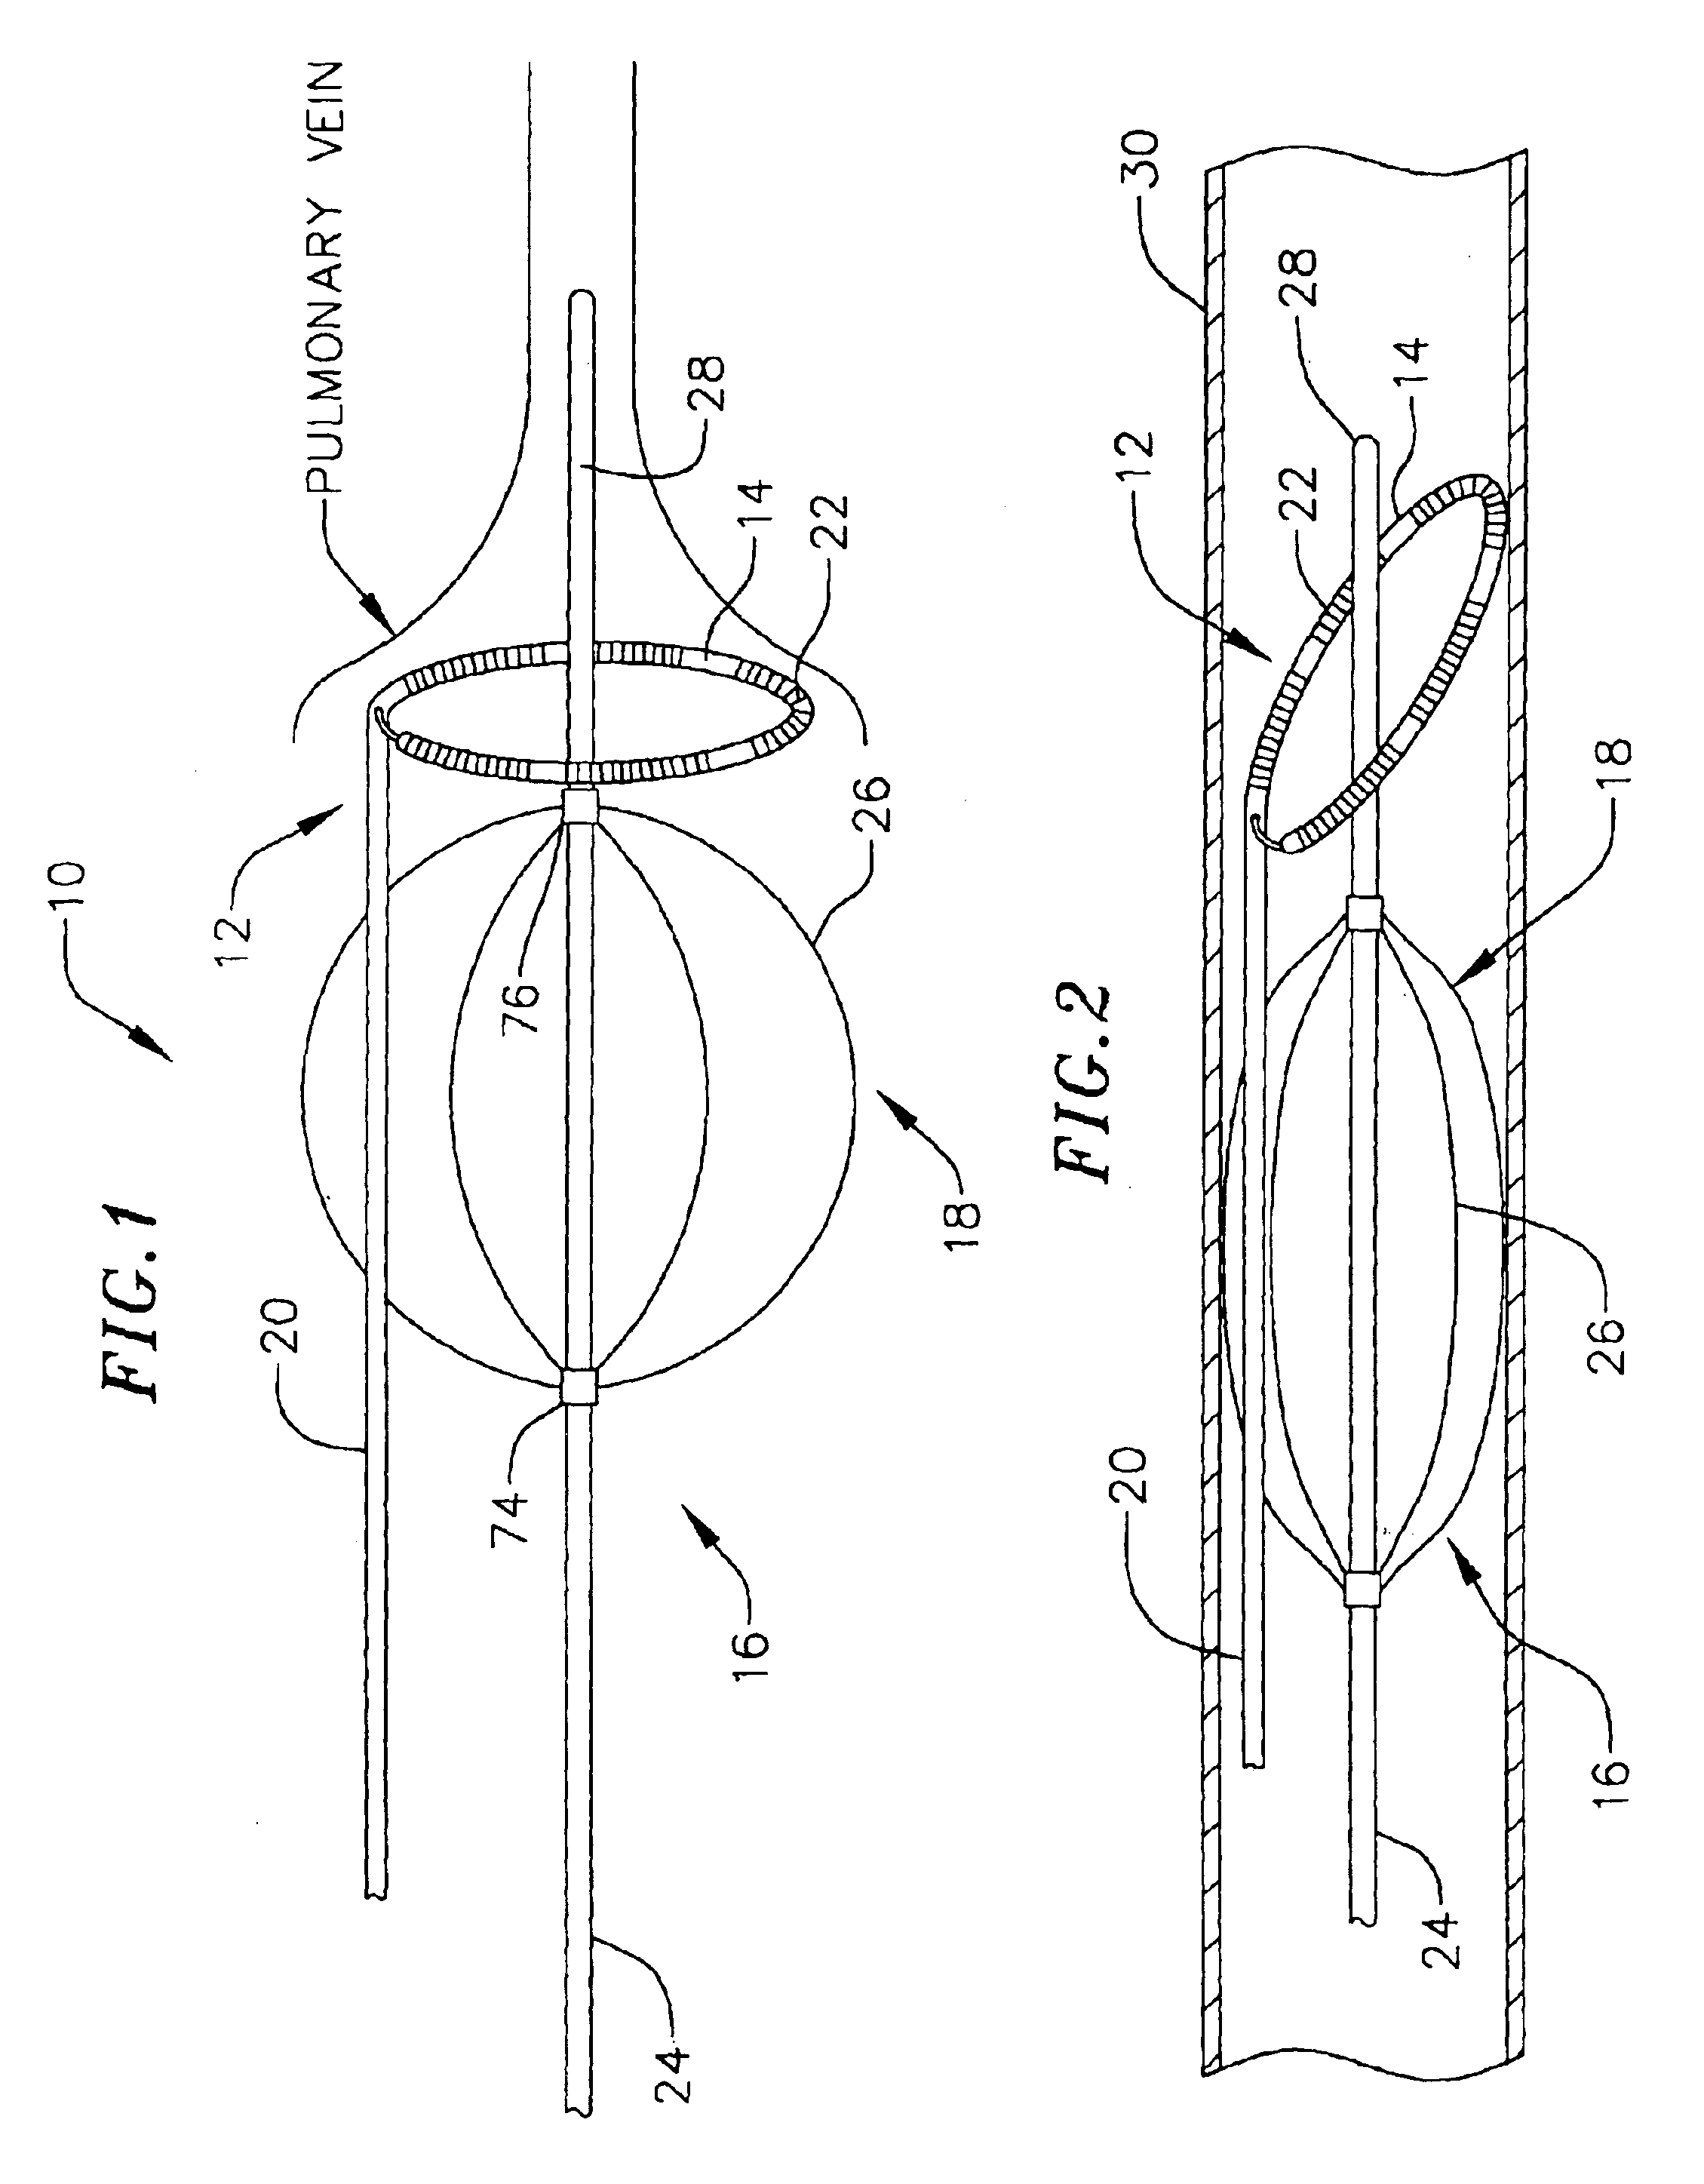 Loop structures for supporting diagnostic and therapeutic elements in contact with body tissue and expandable push devices for use with same